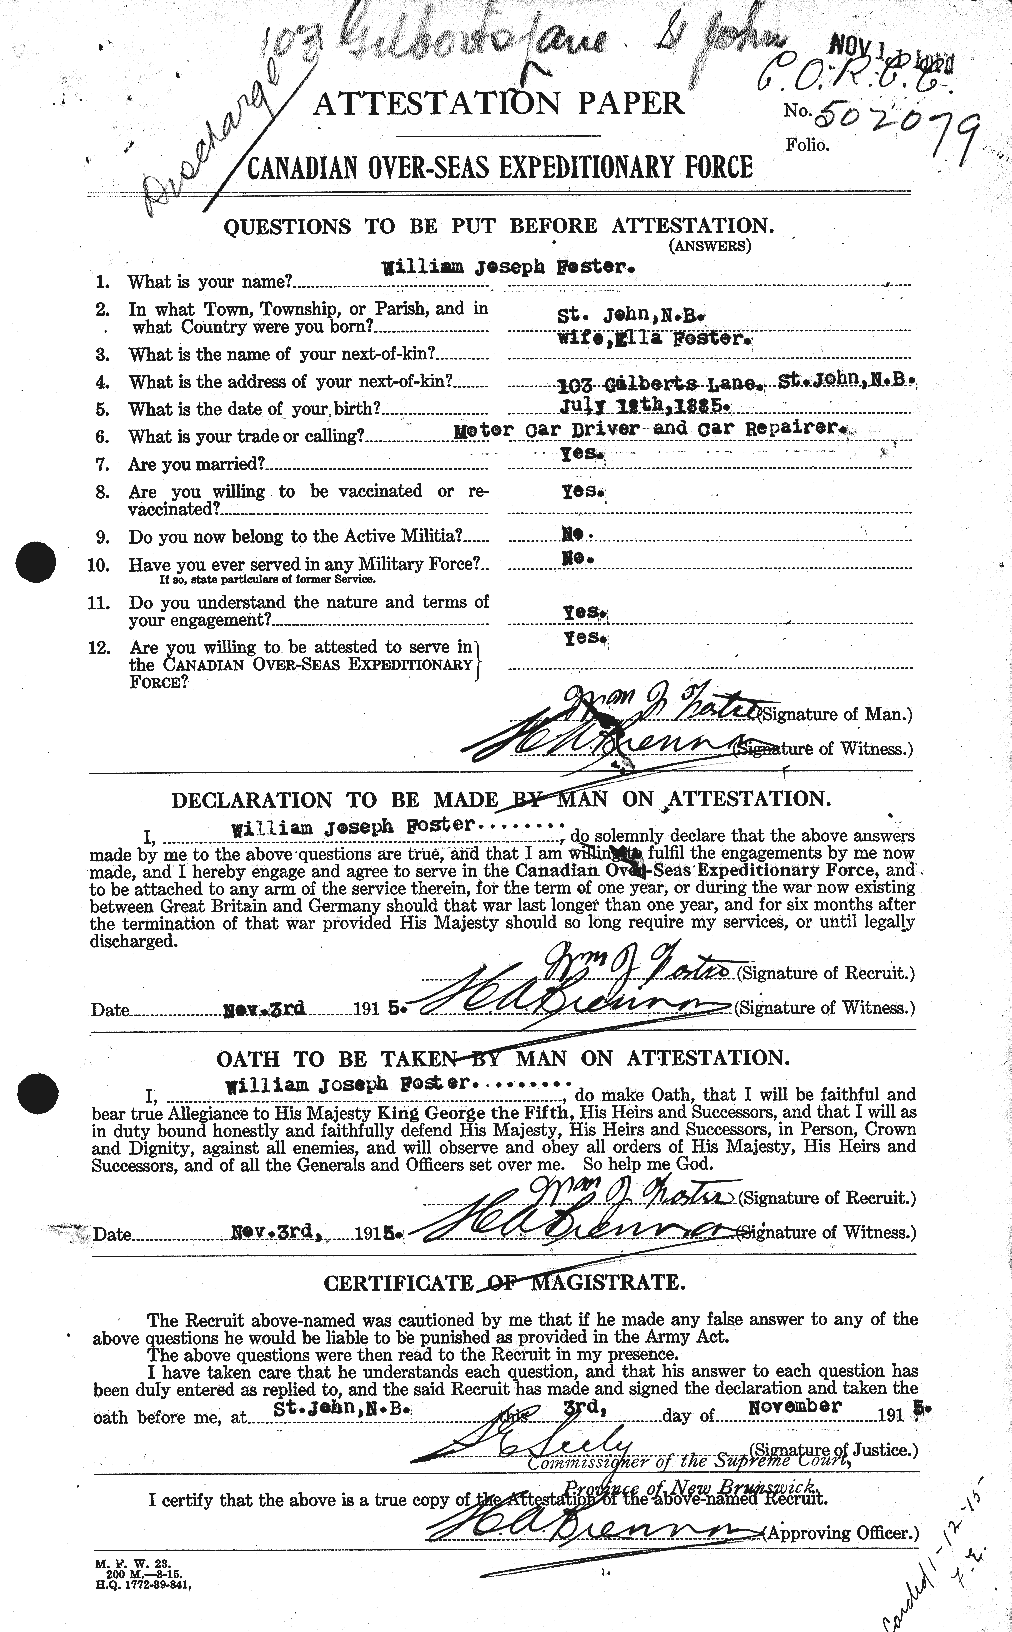 Personnel Records of the First World War - CEF 328765a